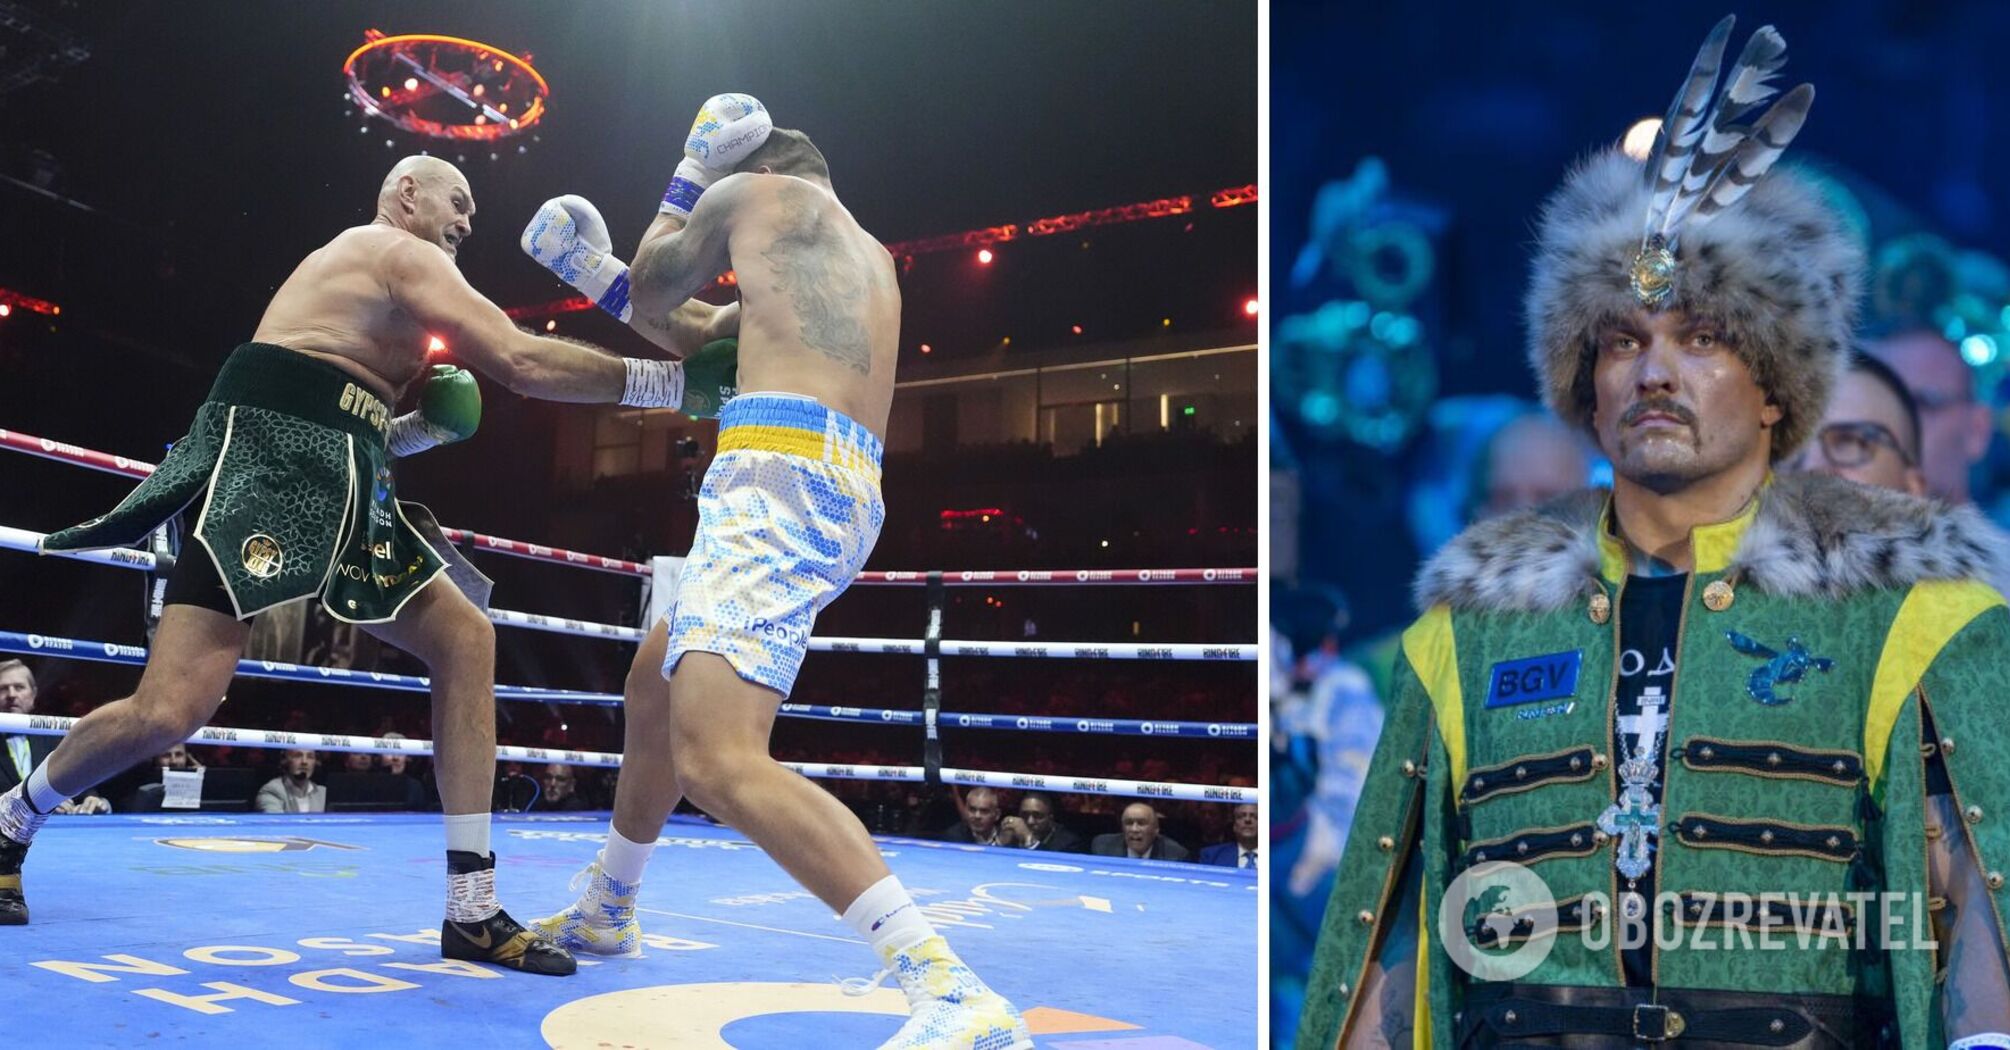 Usyk topped the prestigious ranking of the best boxers in the world